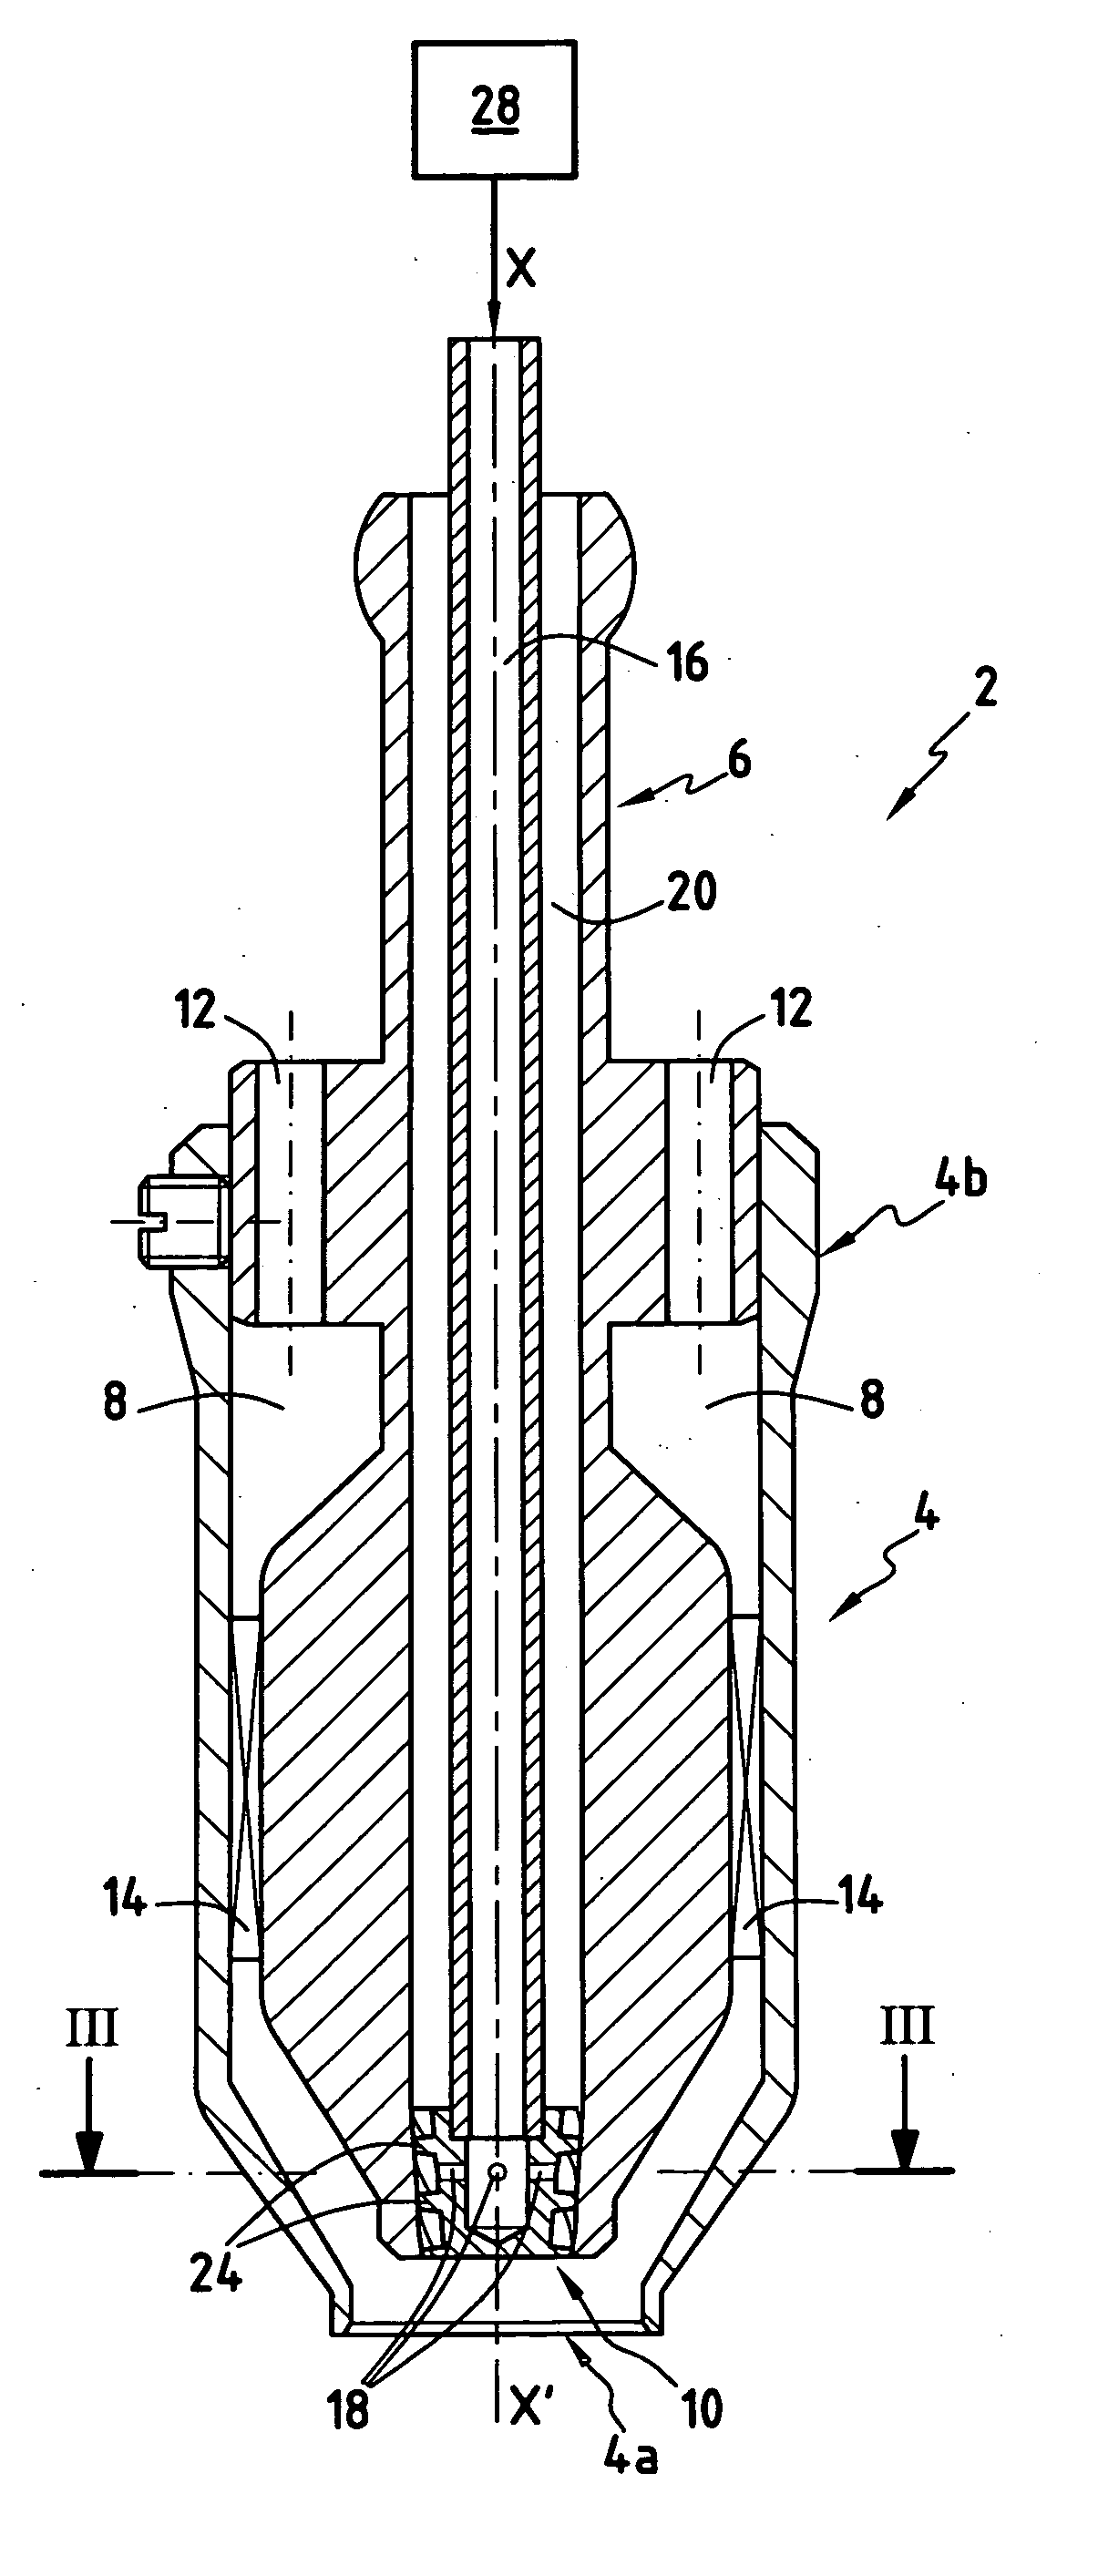 Effervescence injector for an aero-mechanical system for injecting air/fuel mixture into a turbomachine combustion chamber